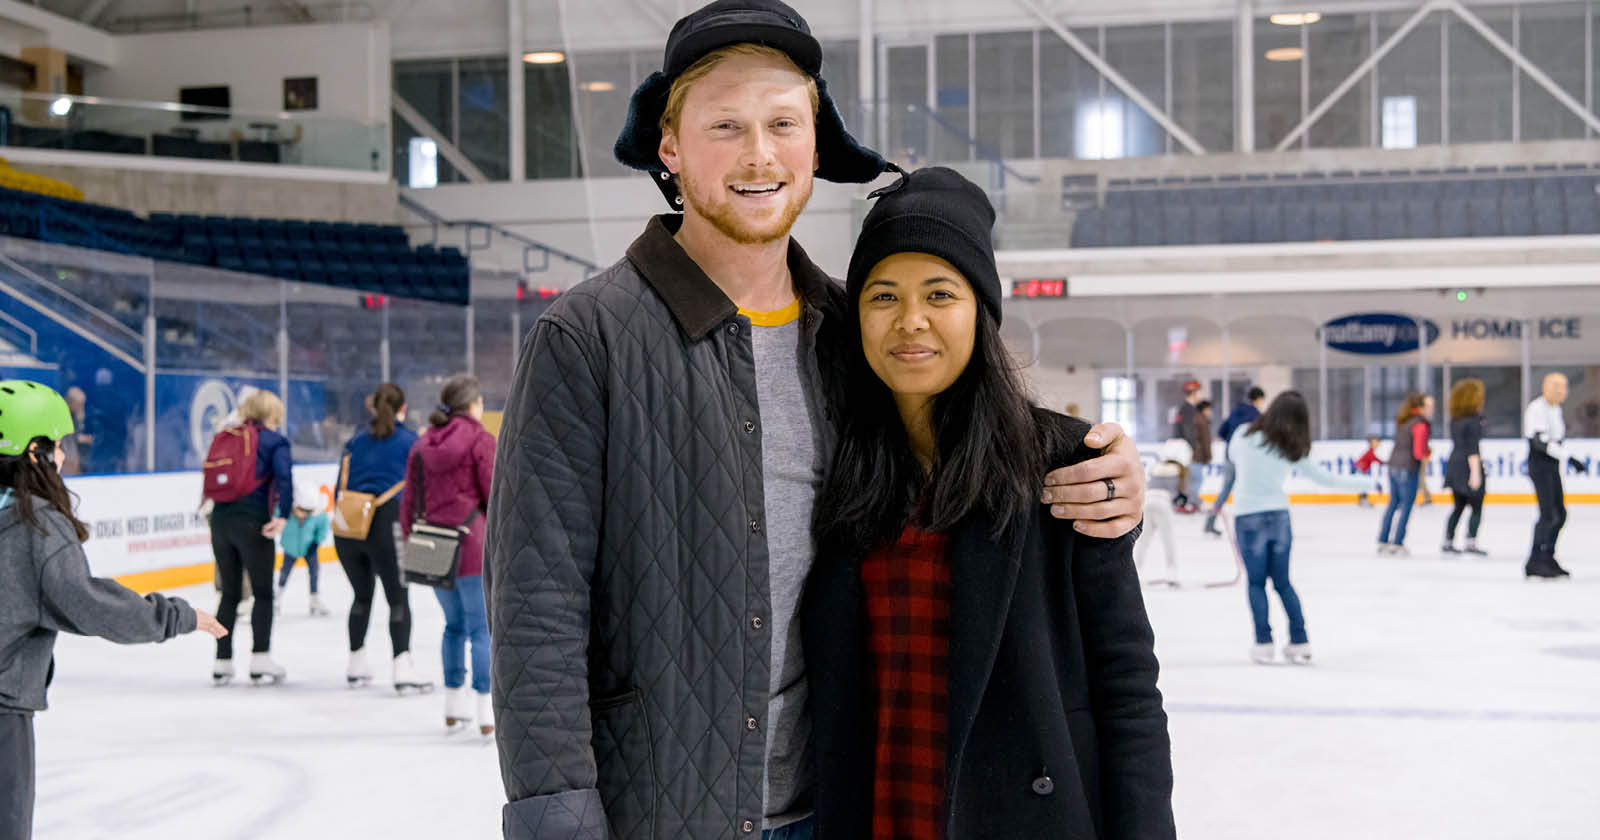 Two TMU community members posing for a photo while skating on the ice at the MAC